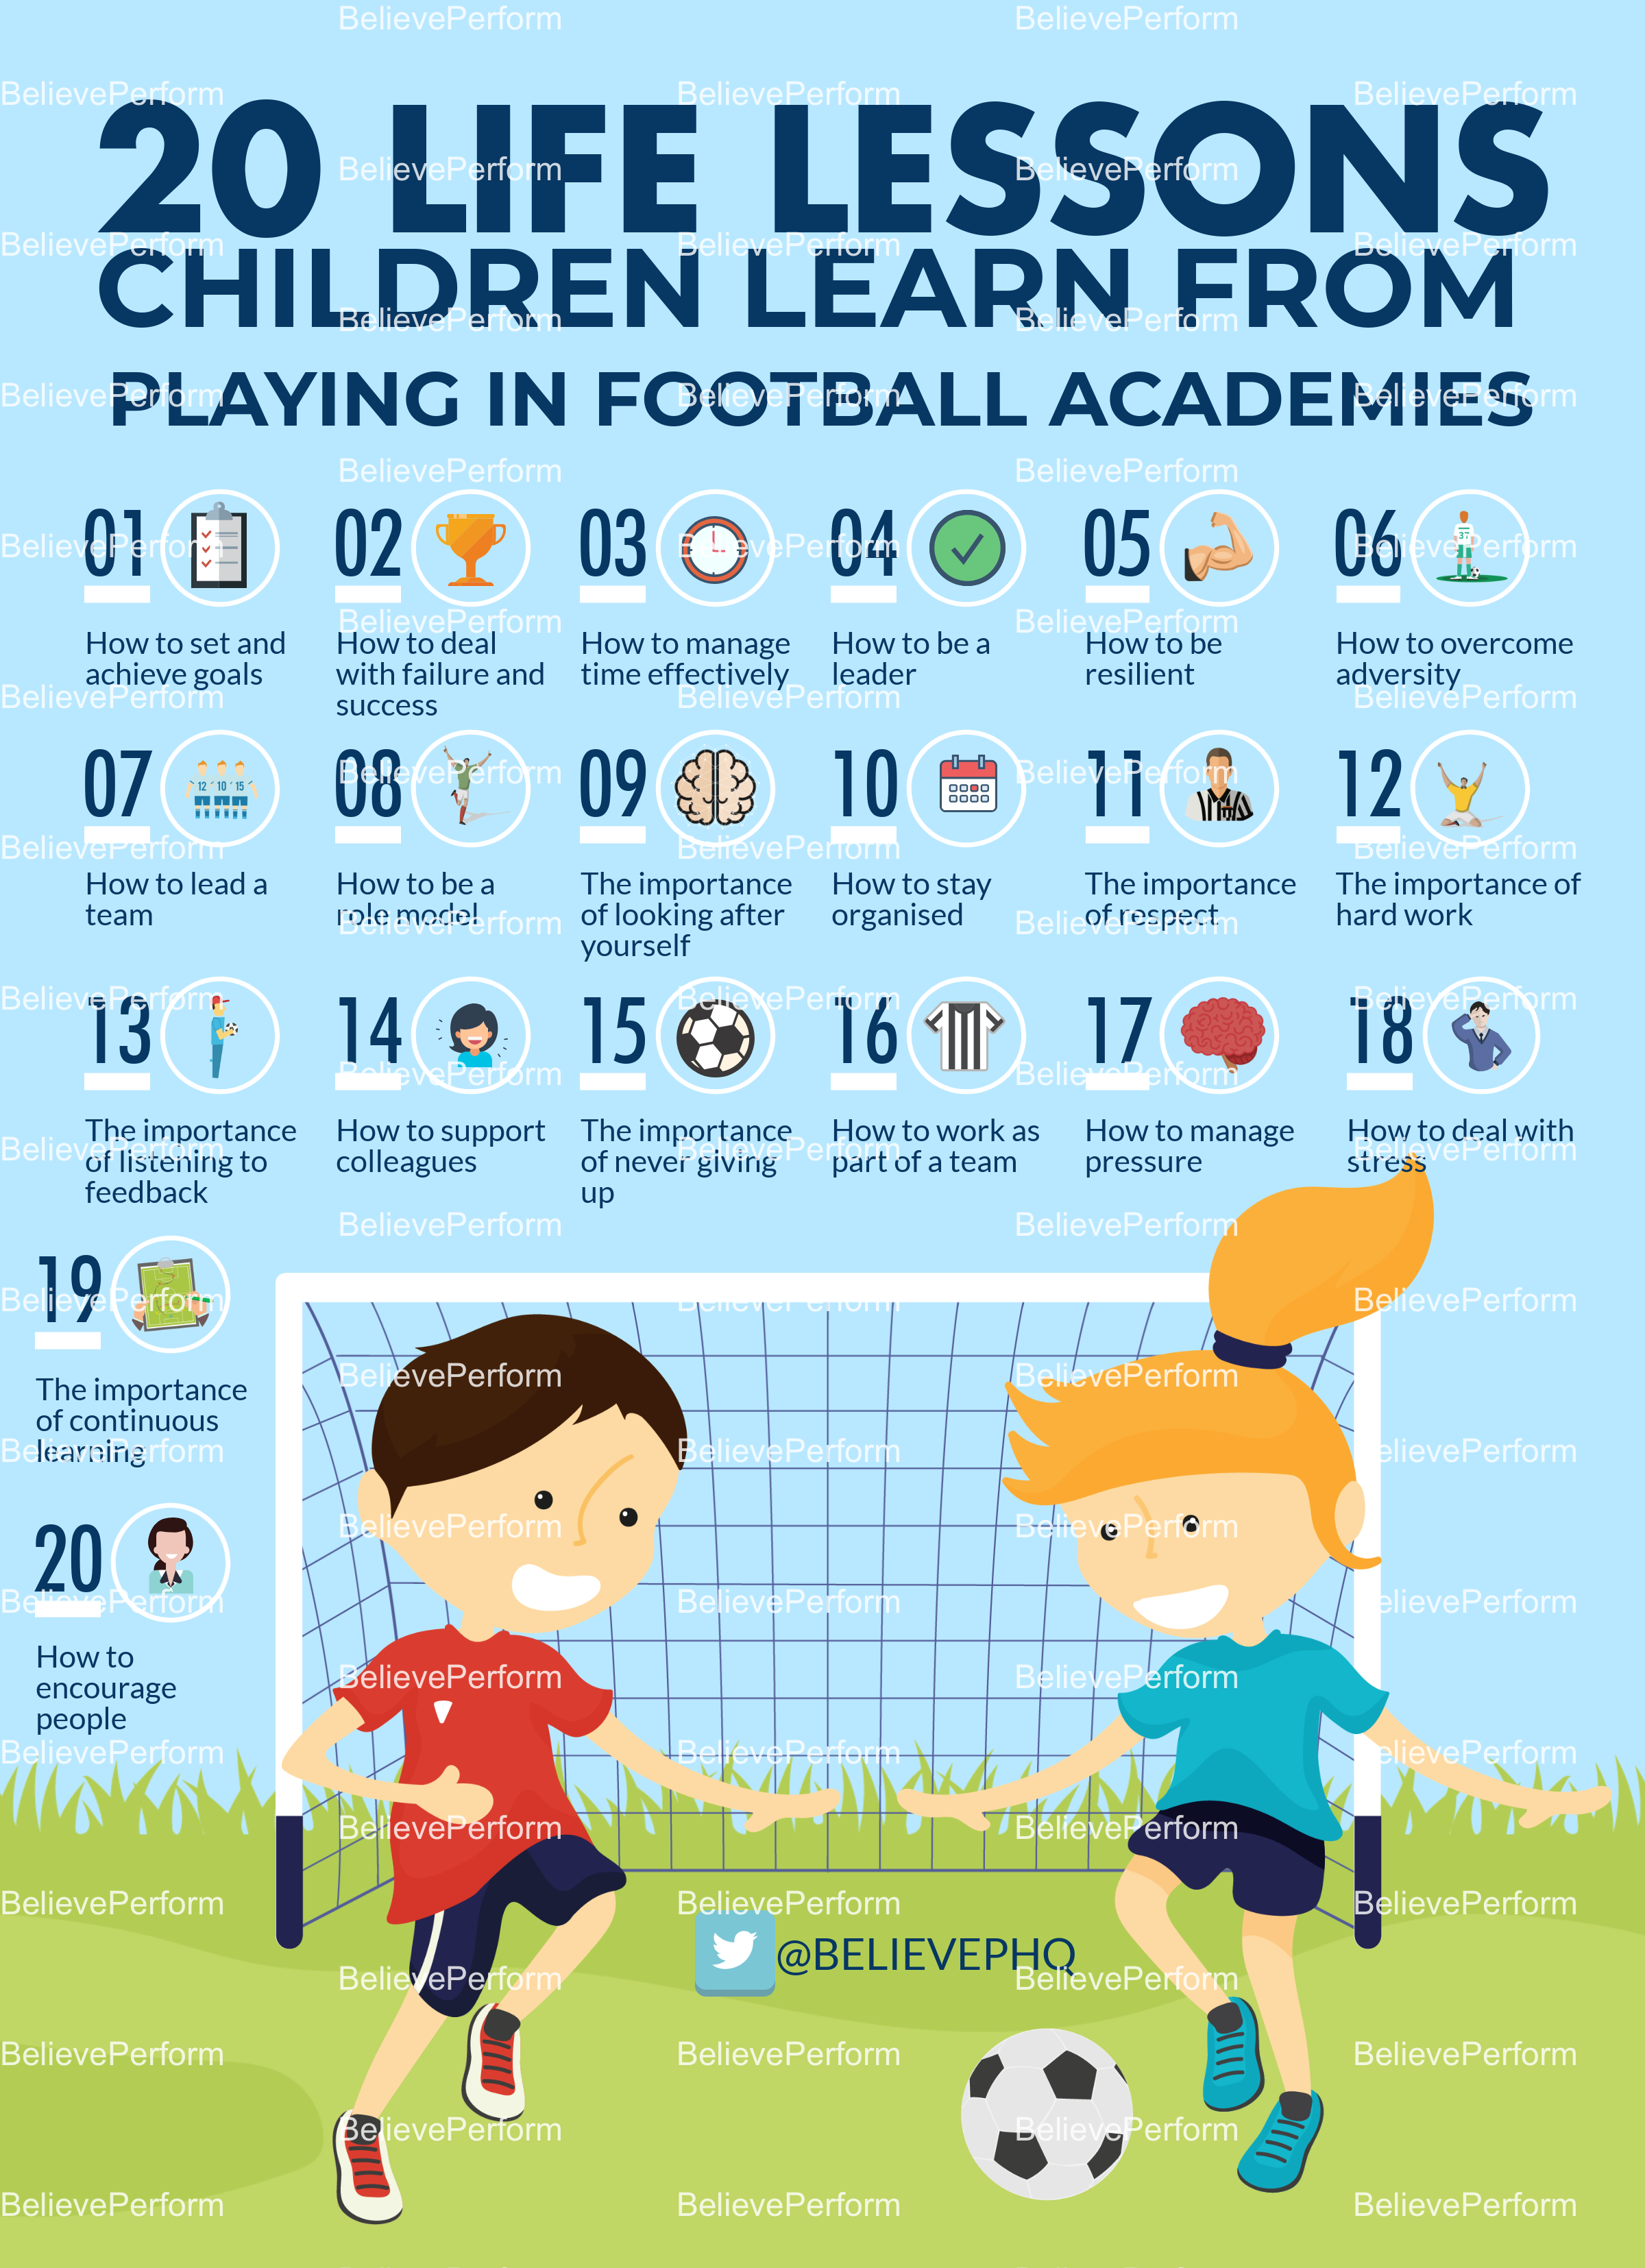 20-life-lessons-children-can-learn-from-playing-in-football-academies